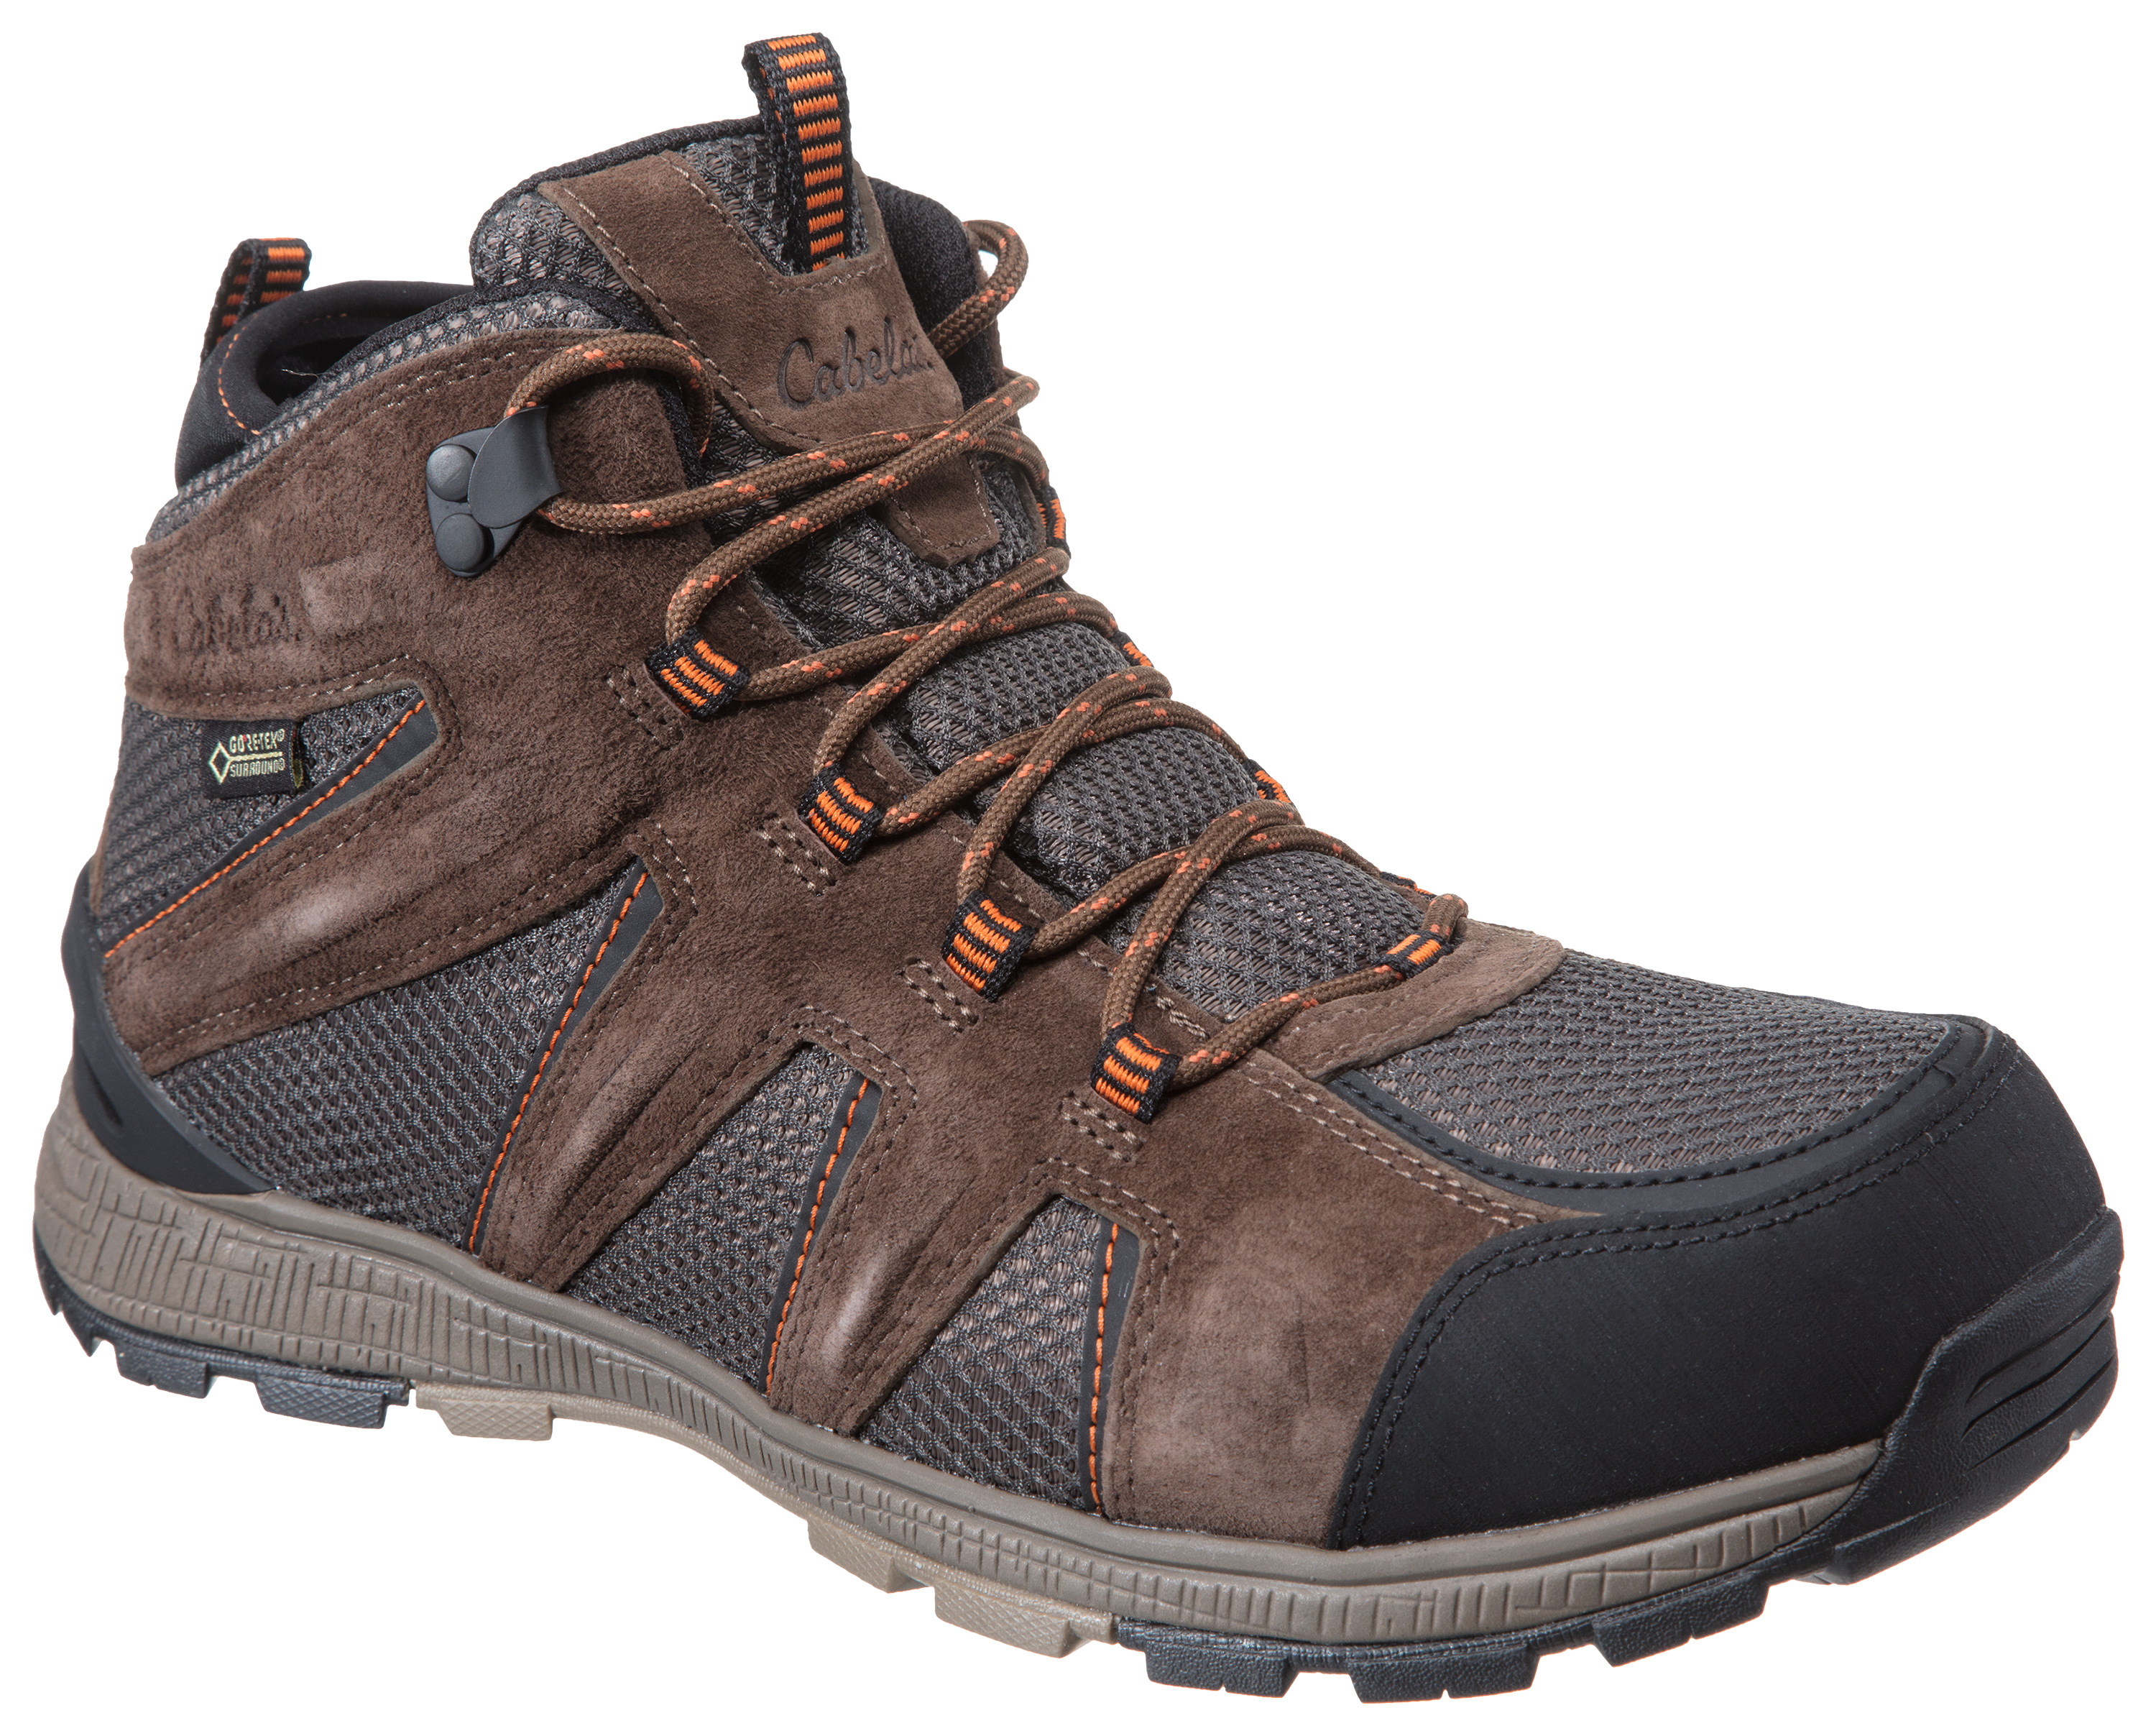 Cabela's 360 Mid GORE-TEX Hiking Boots for Men